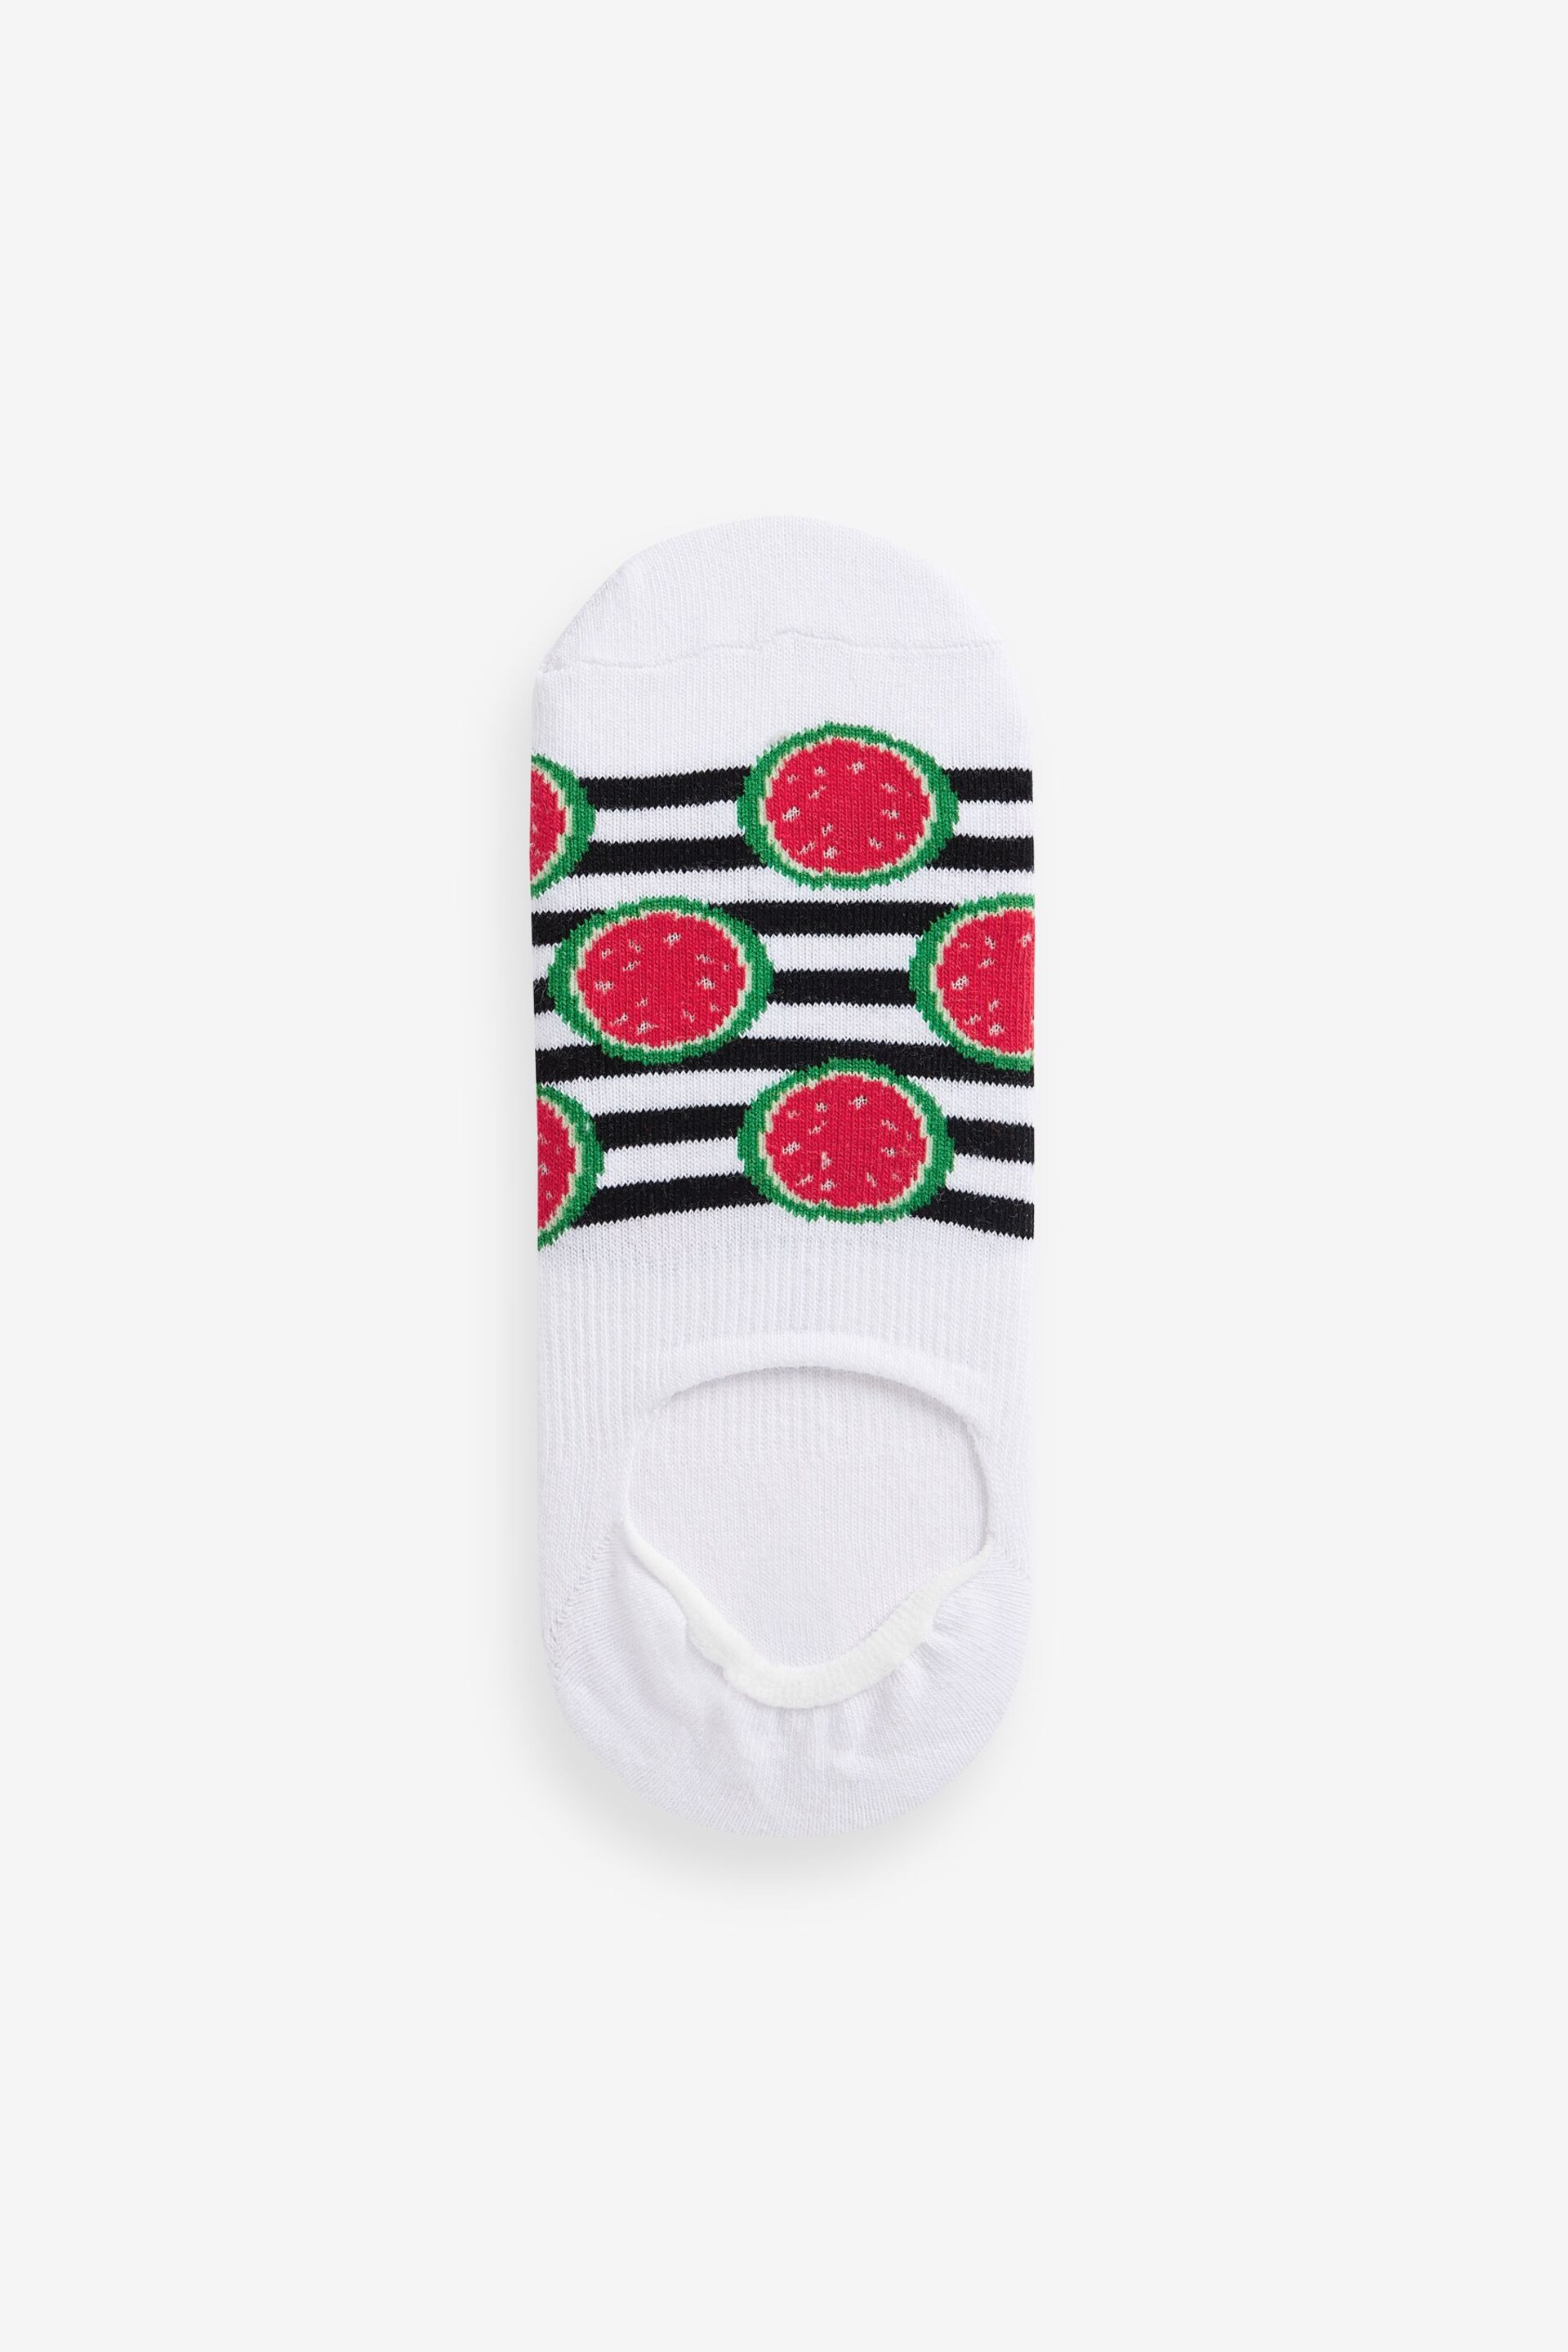 Fruit Invisible Trainer Socks 4 Pack - Image 3 of 5